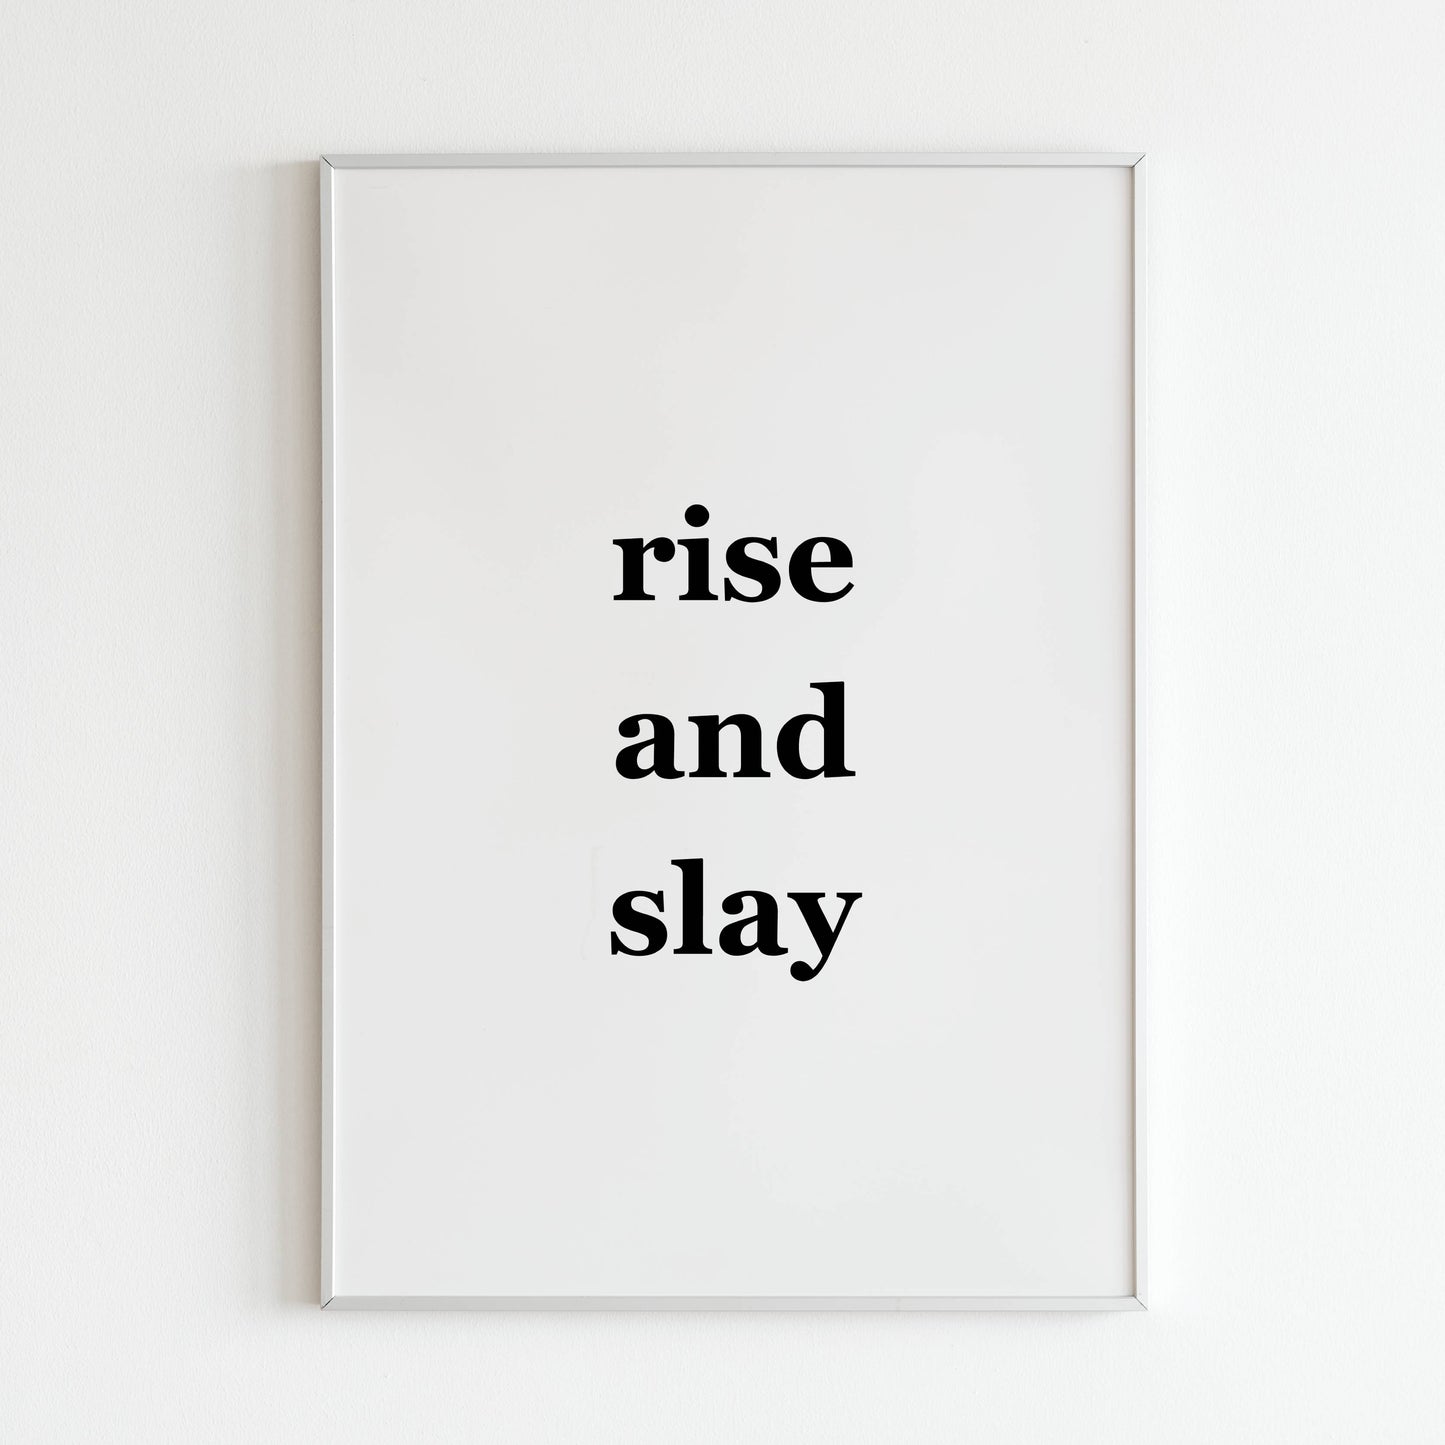 Downloadable "Rise and slay" wall art to encourage success.